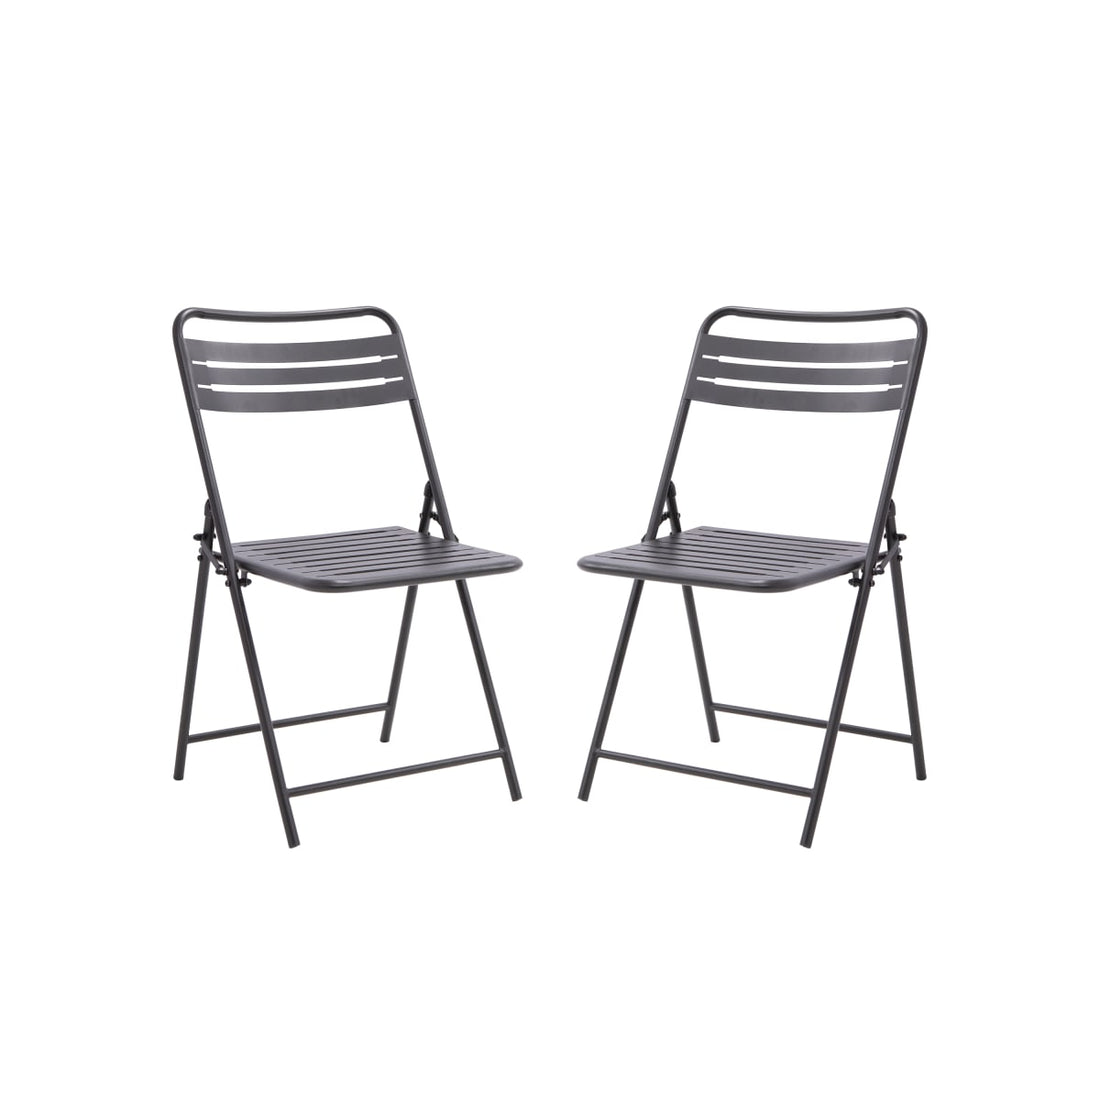 SET OF 2 FOLDING DINING CHAIRS CAFE II ORIGAMI STEEL ANTHRACITE